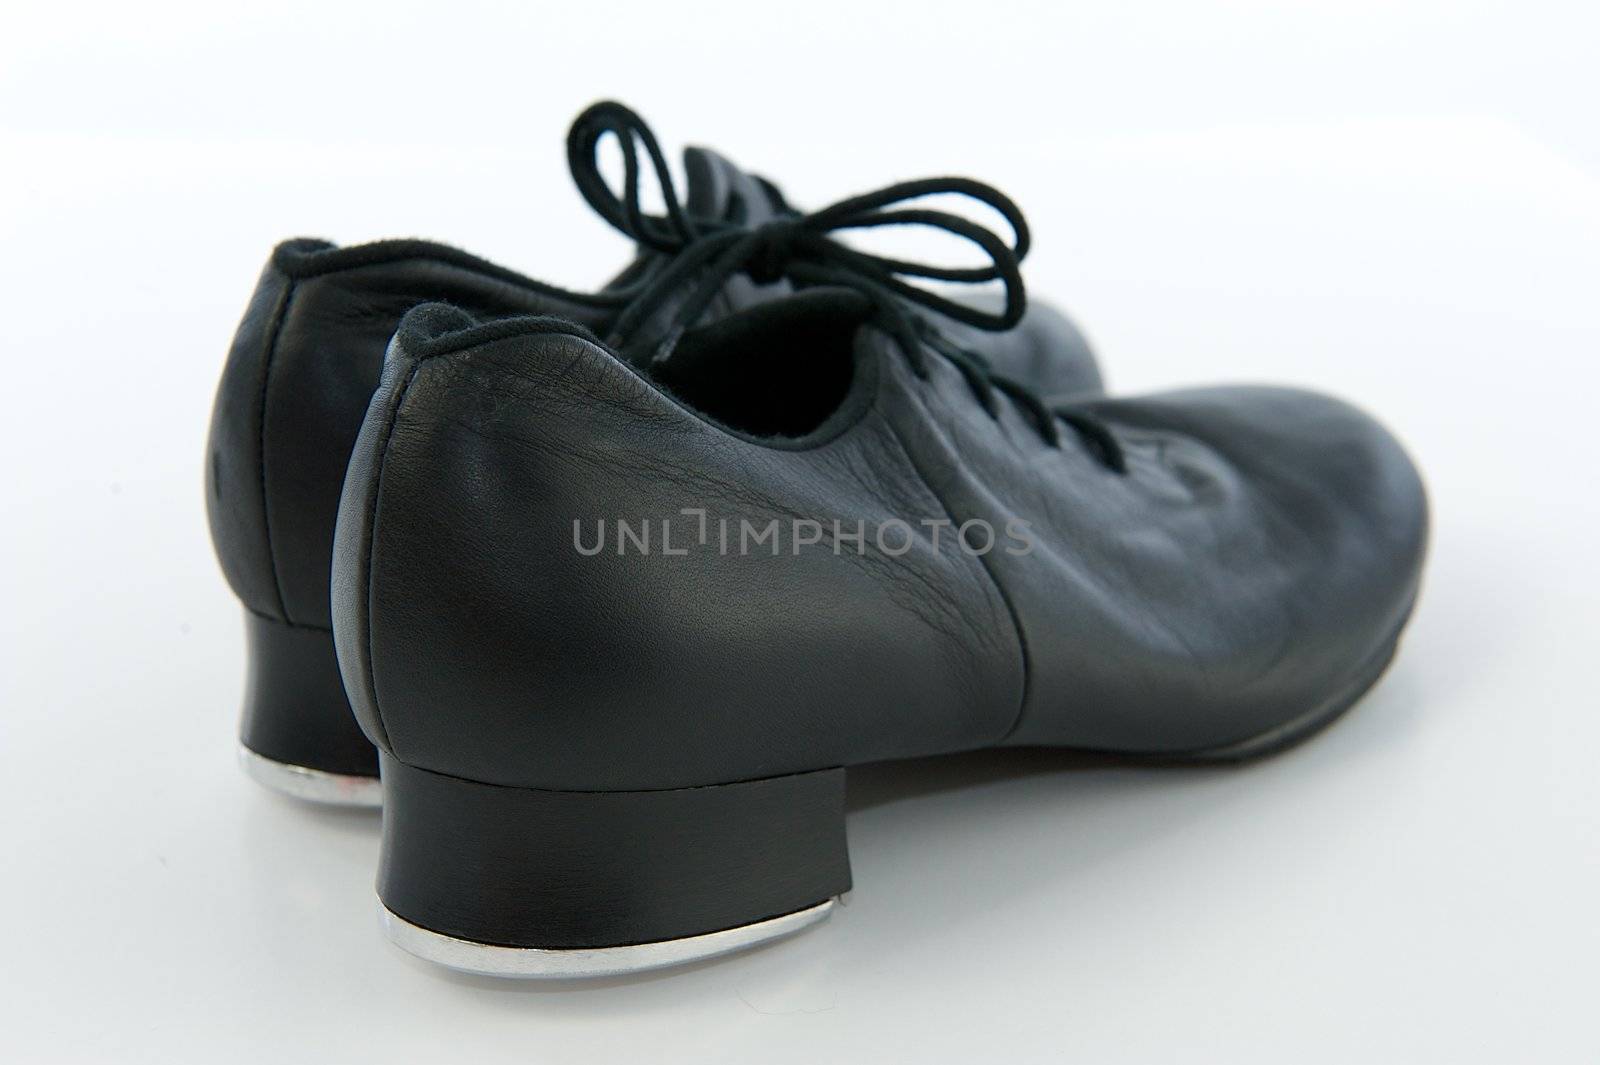 Pair of Black Tap Shoes With Laces by pixelsnap